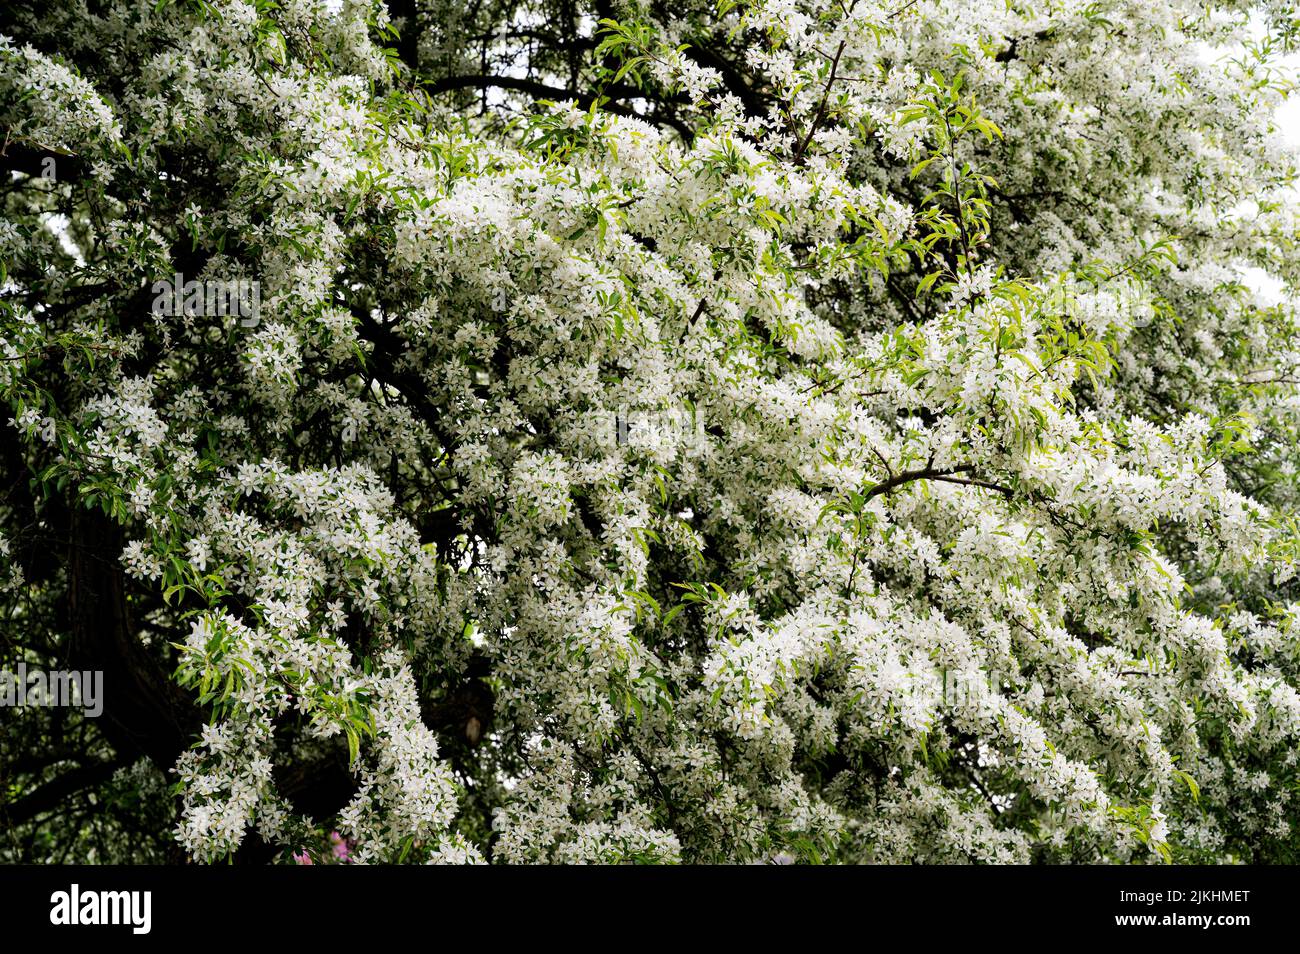 Malus Transitoria, cut-leaf crabapple, Rosaceae, crabapple. Showy white blossom of this tree. Stock Photo